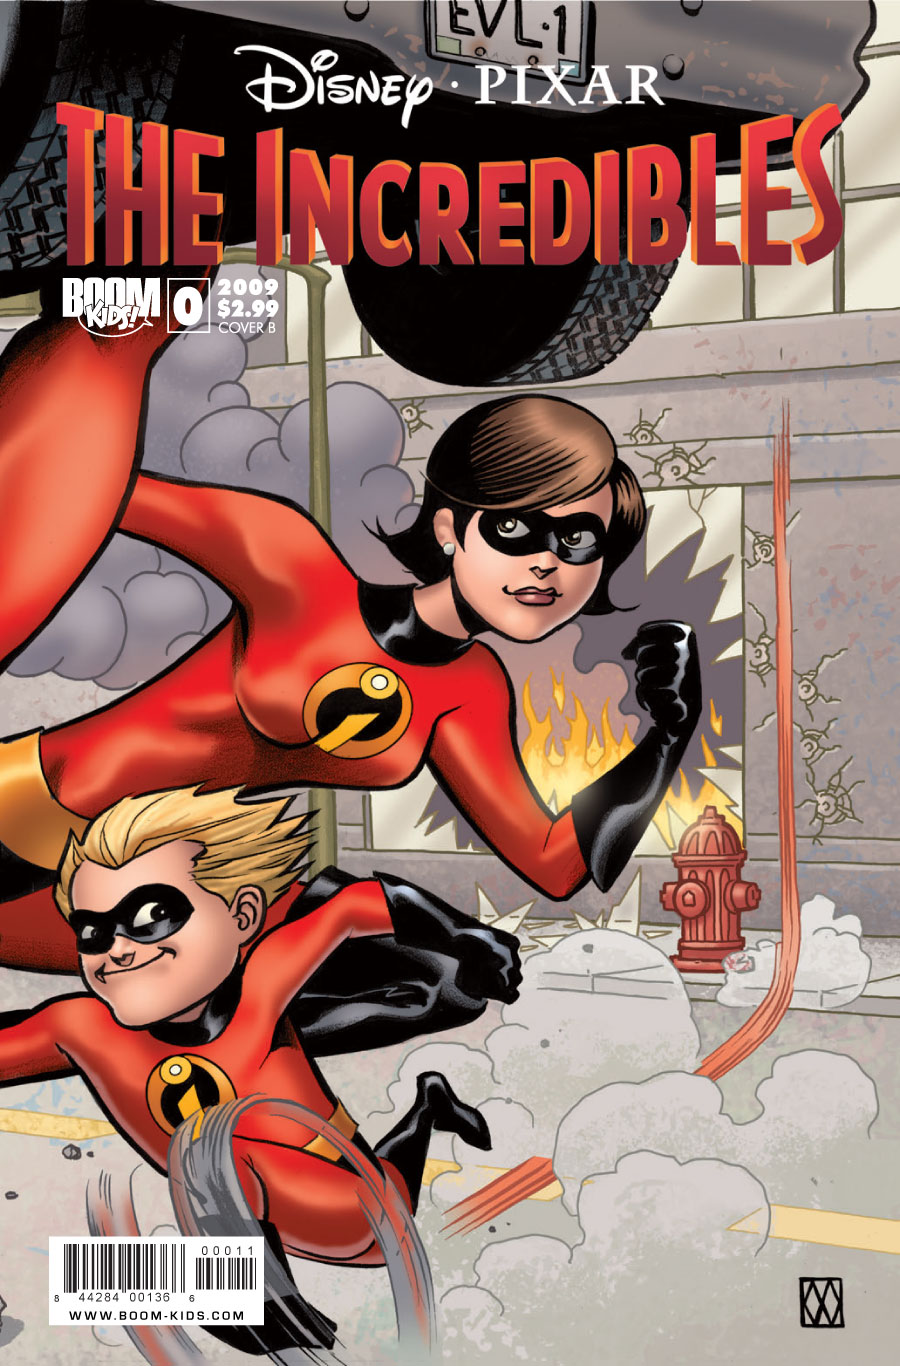 THE INCREDIBLES #0